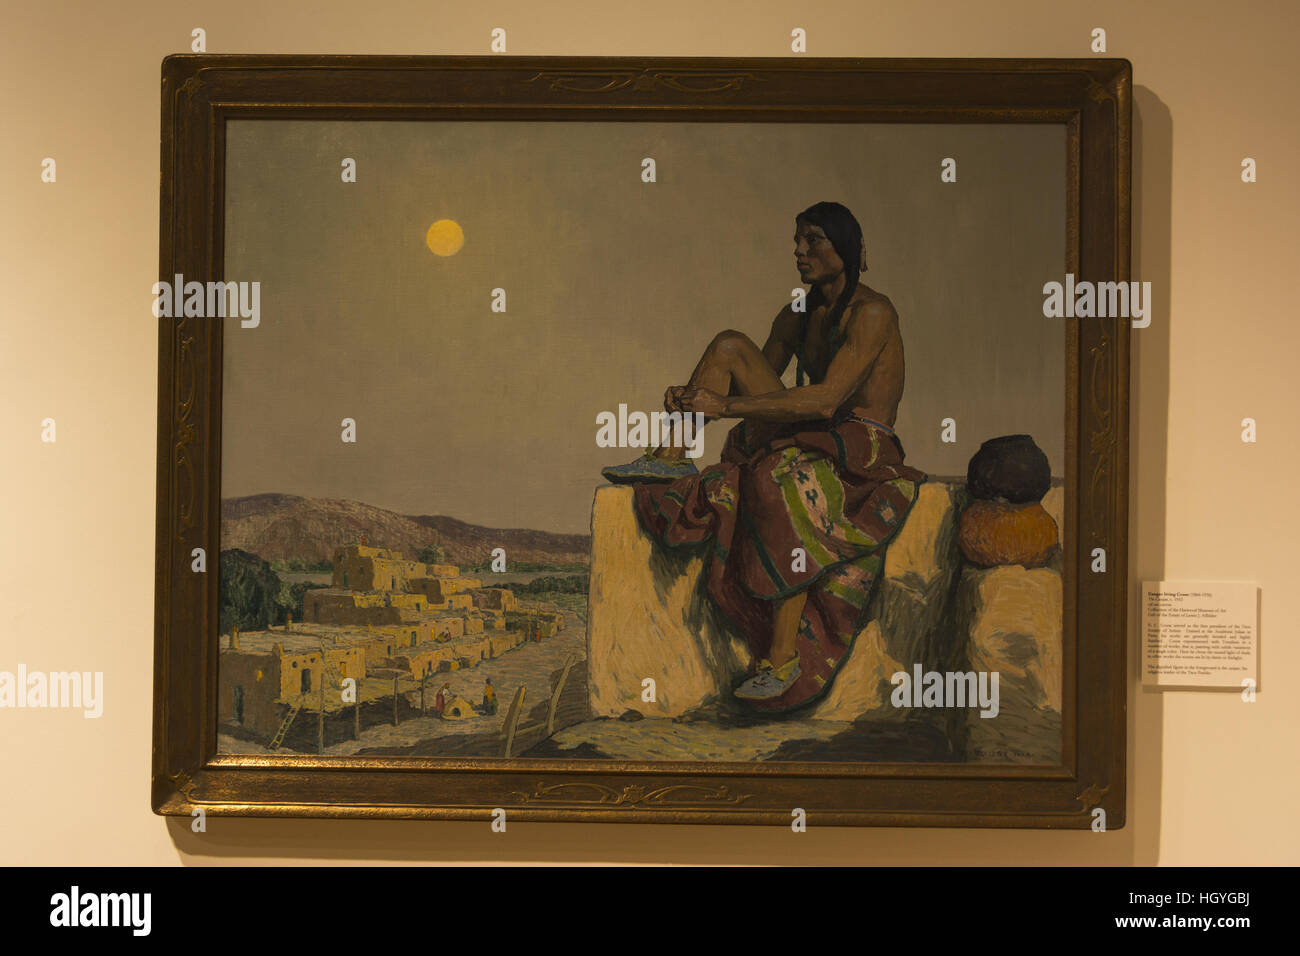 New Mexico, Taos, Harwood Museum of Art, painting Stock Photo